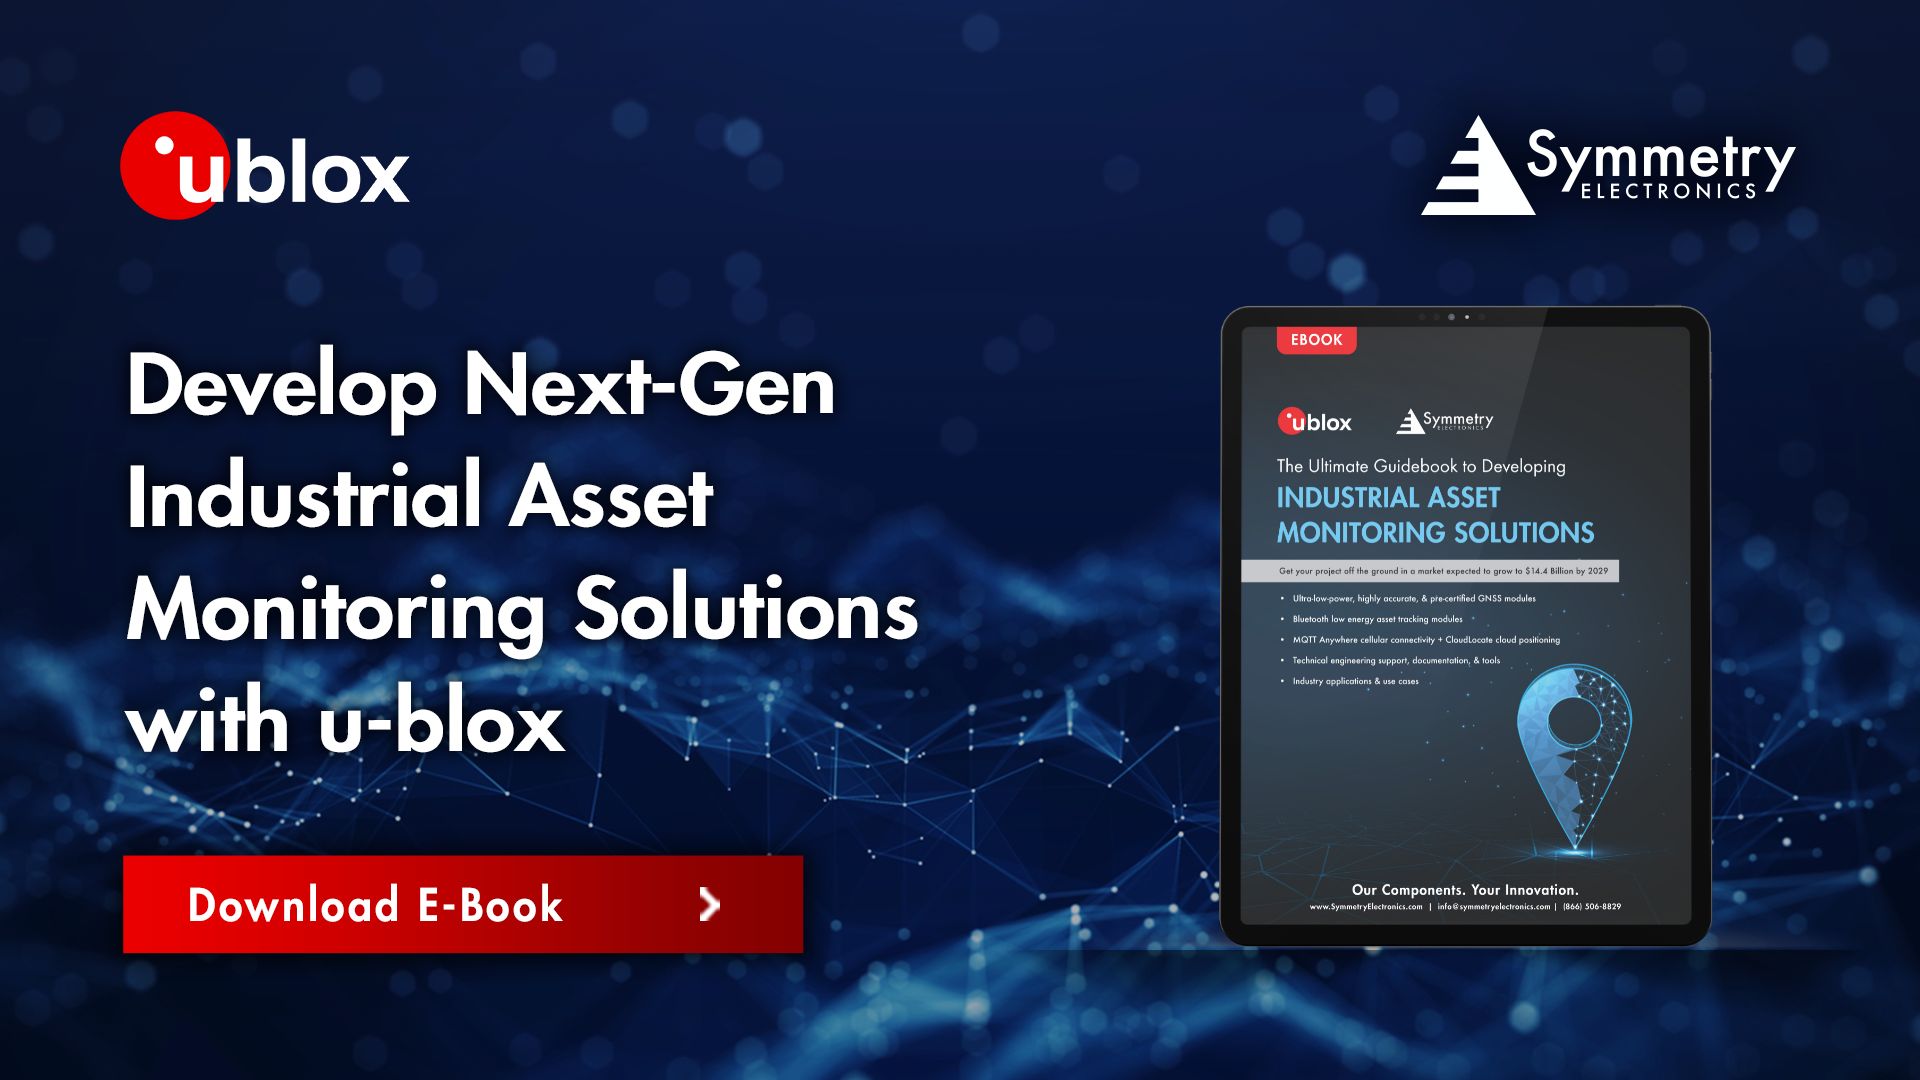 Download the u-blox Industrial Asset Tracking Monitoring Solutions eBook at Symmetry Electronics here